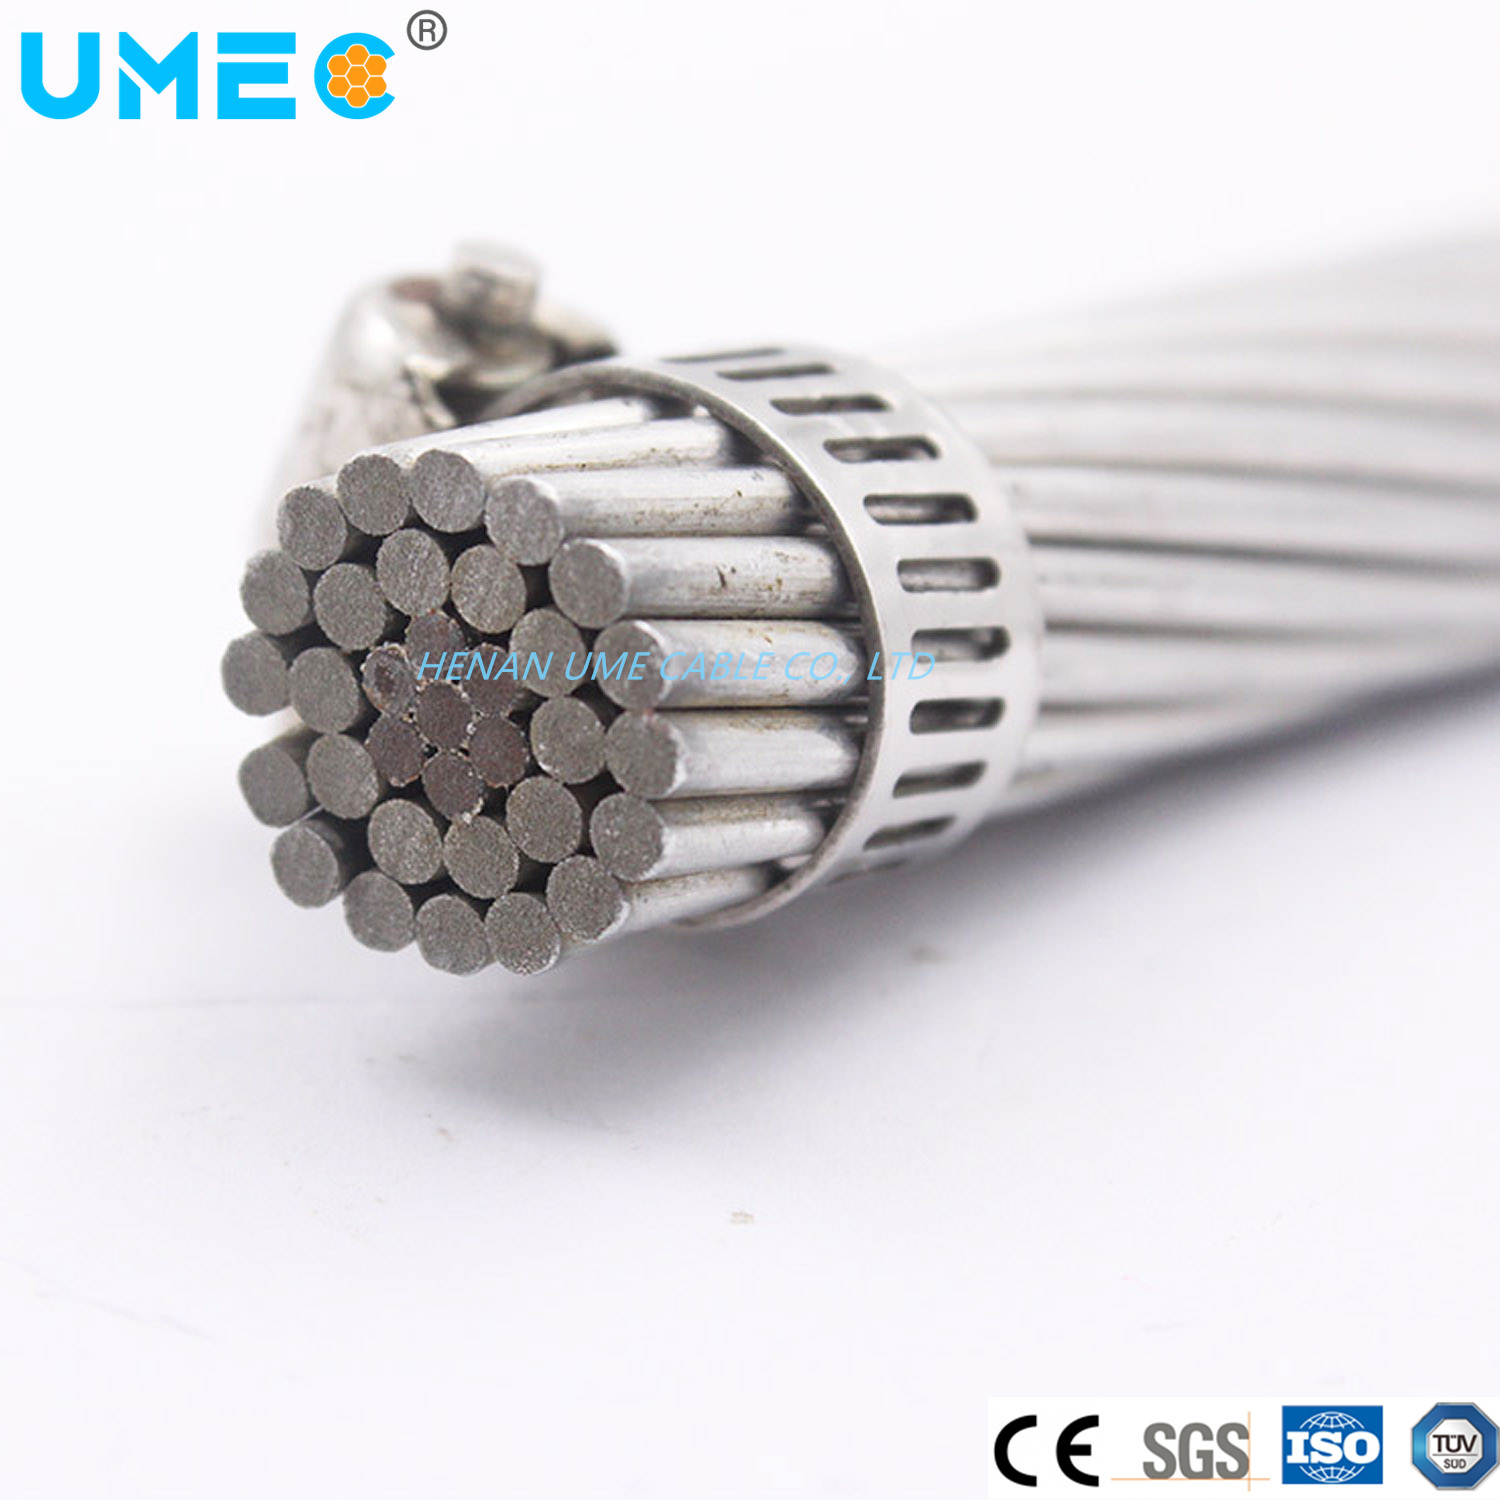 IEC 61089 High Voltage Aacsr A2/S1a Aluminum Alloy Conductor Steel Reinforced Aluminum Alloy Wire/Galvanized Steel Wire 50/30 120/20 240/30mm2